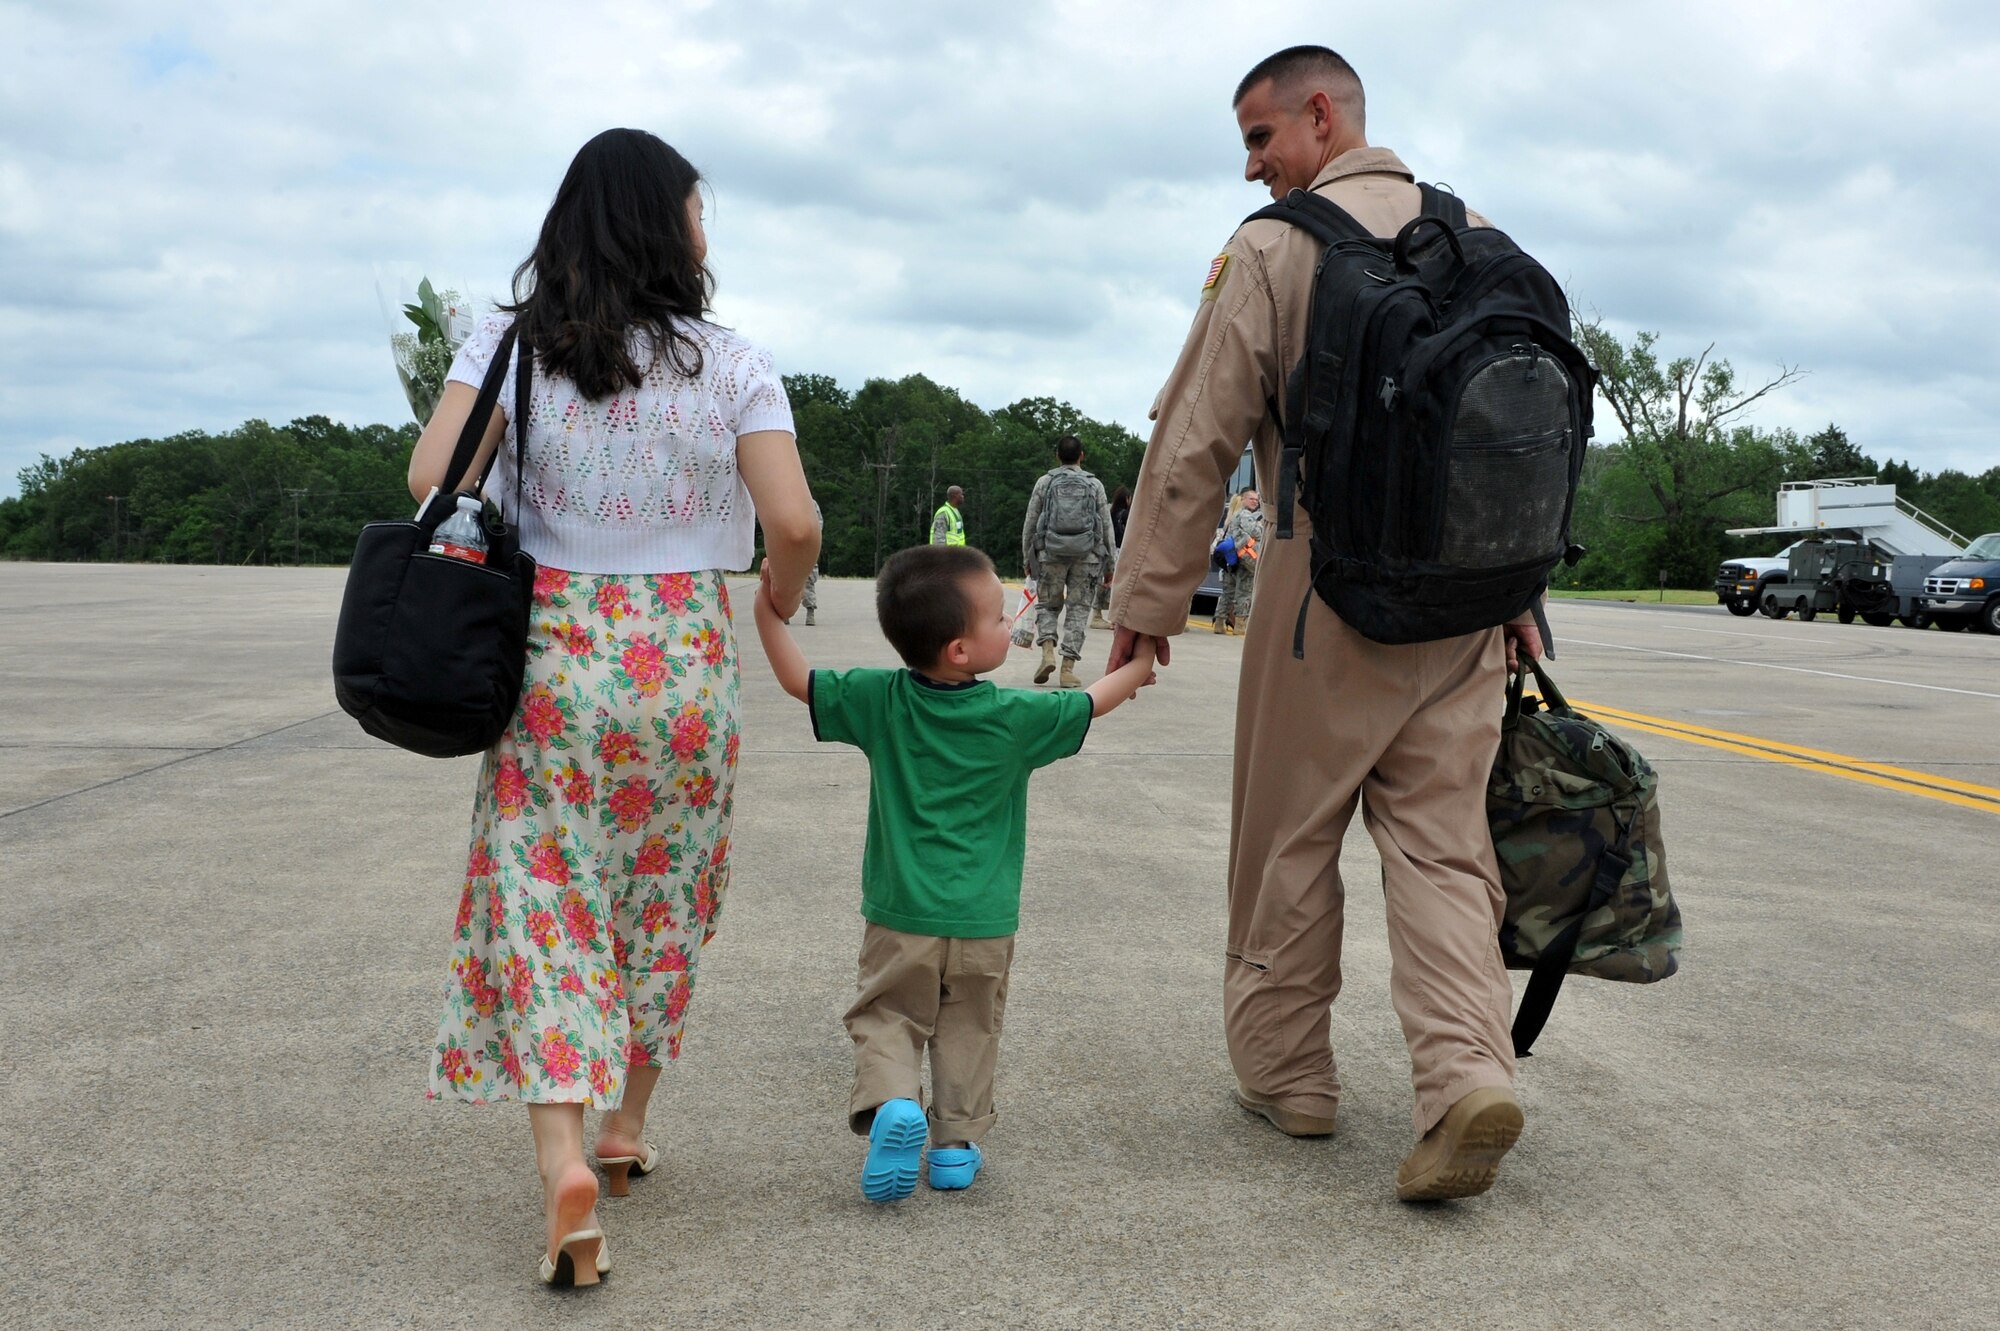 Capt. Anthony Wright, 61st Airlift Squadron navigator, leaves from the flightline with his wife SuJin, who is 7 months pregnant, and son, Matthew, May 21, 2011 on the Little Rock Air Force Base, Ark. Nearly 200 Team Little Rock Airmen reunited with family members and friends Saturday after returning from months of deployments supporting operations in Southwest Asia. (U.S. Air Force photo/Staff Sgt. Chris Willis)